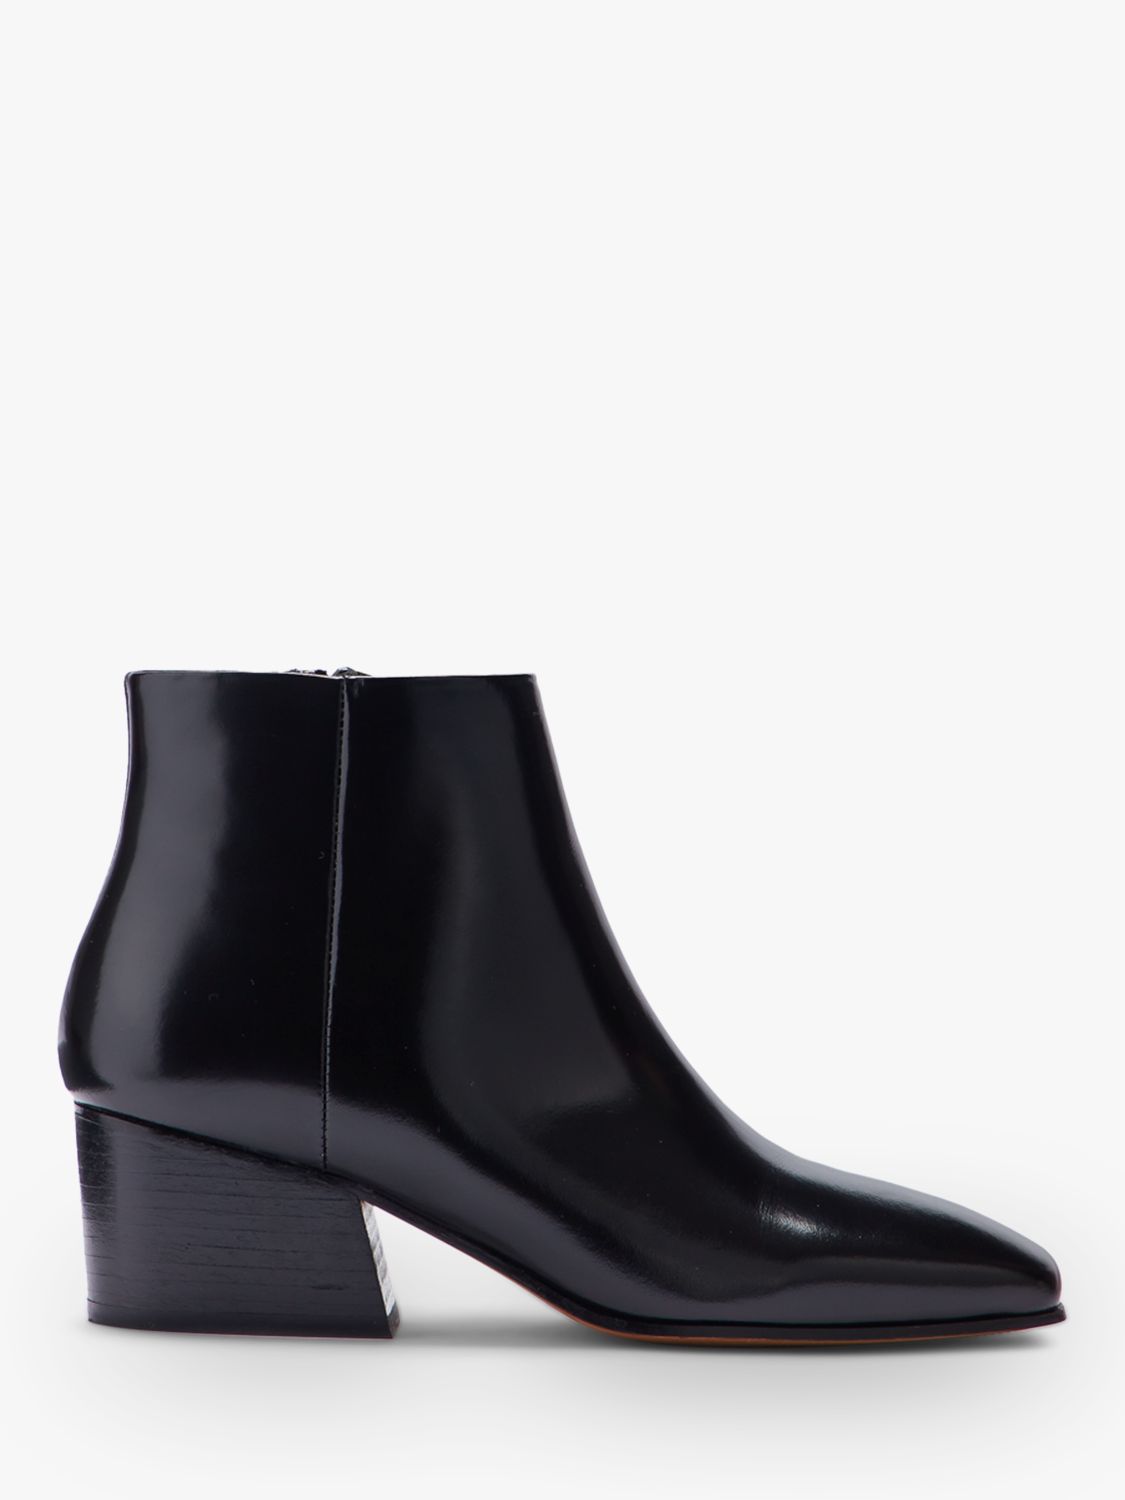 Jigsaw Darcy Hi-Shine Leather Ankle Boots, Black at John Lewis & Partners